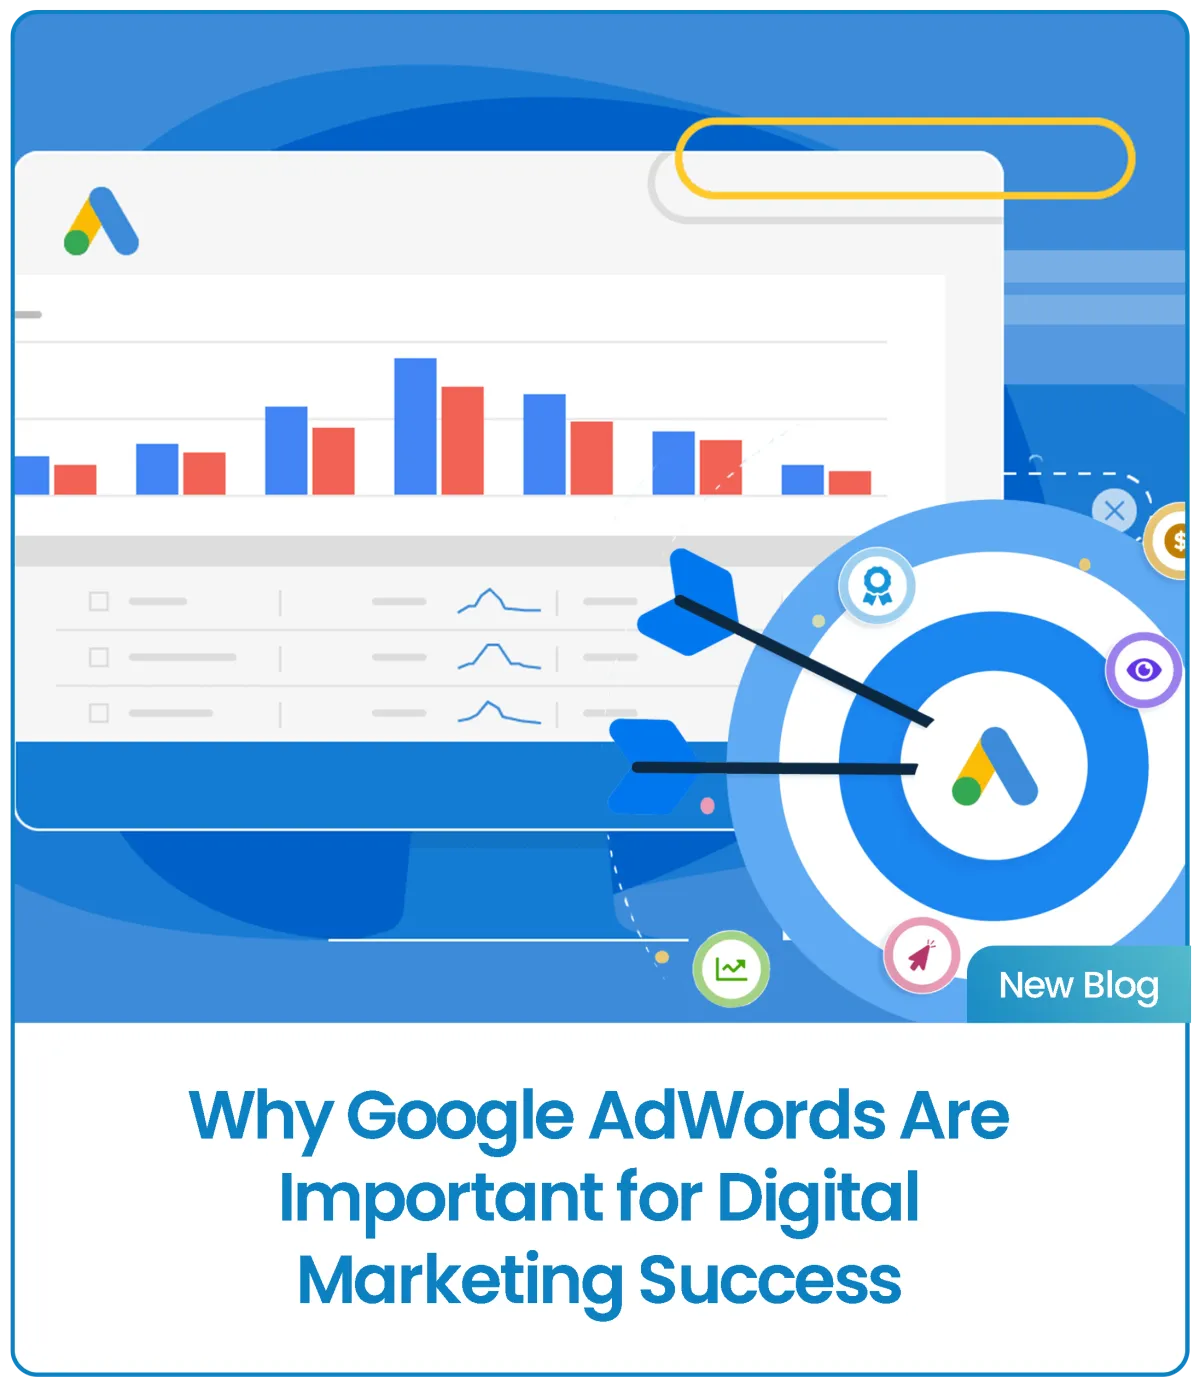 Why Google AdWords Are Important for Digital Marketing Success